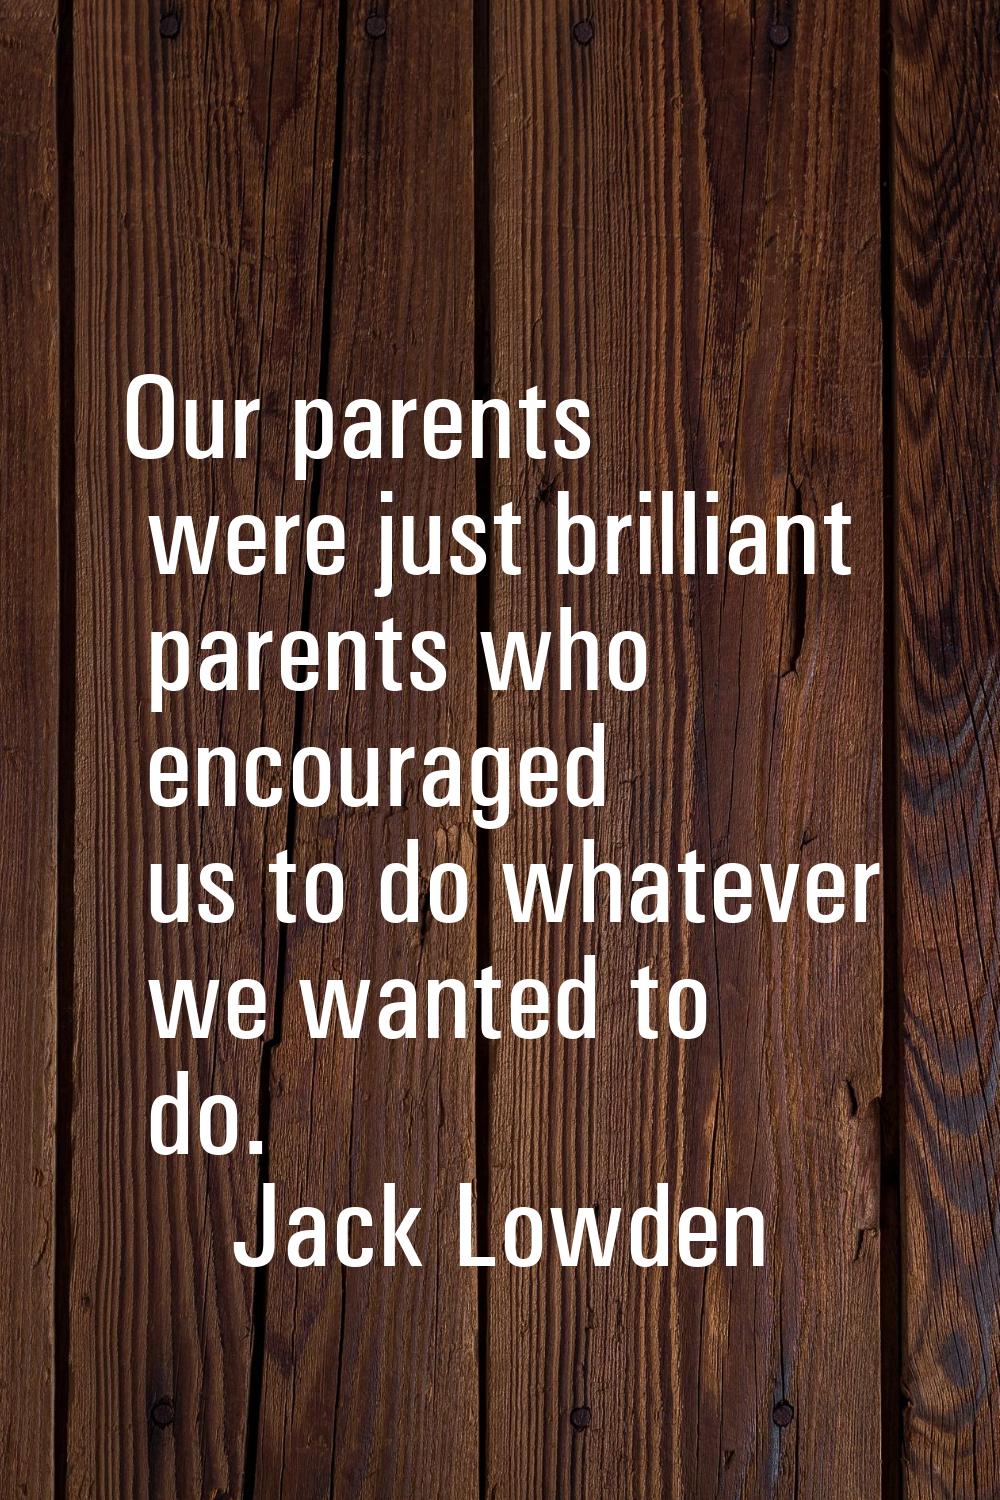 Our parents were just brilliant parents who encouraged us to do whatever we wanted to do.